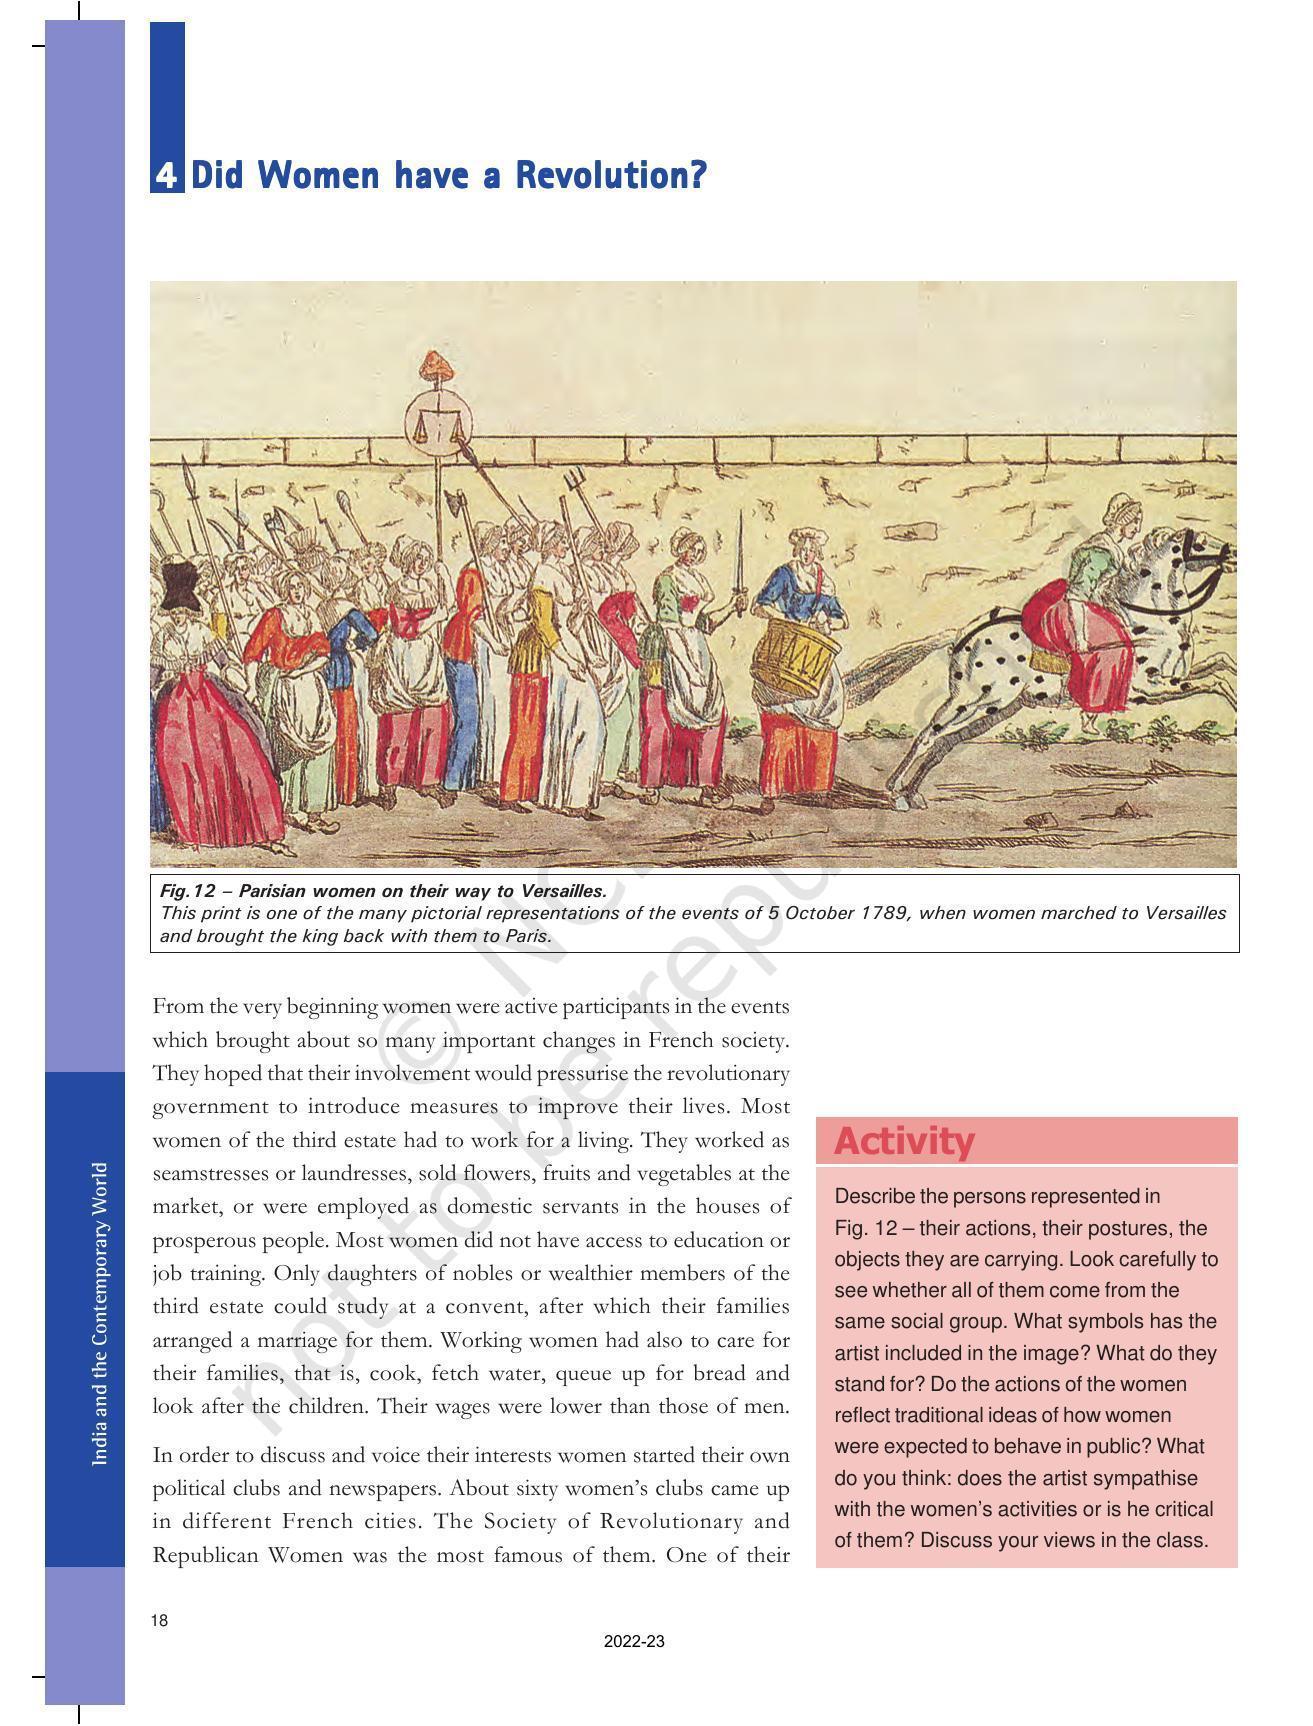 NCERT Book for Class 9 History Chapter 1 The French Revolution - Page 18